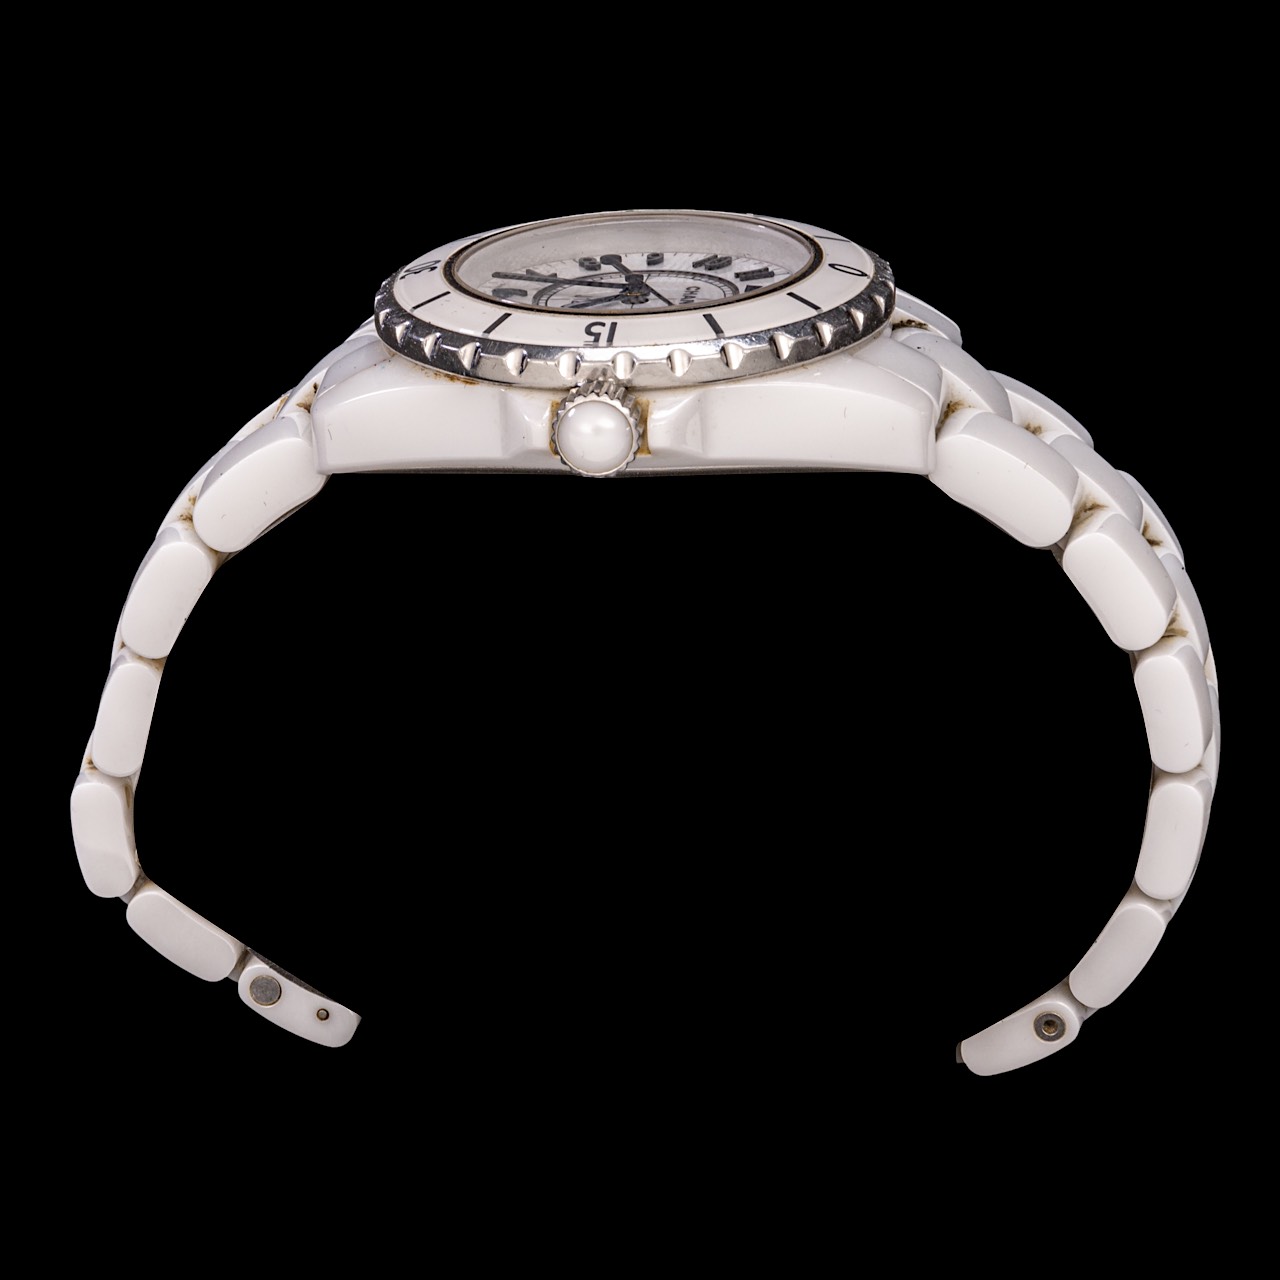 Chanel J12 Watch, white ceramic and steel, 33 mm, Ref. H5698 - Image 6 of 12